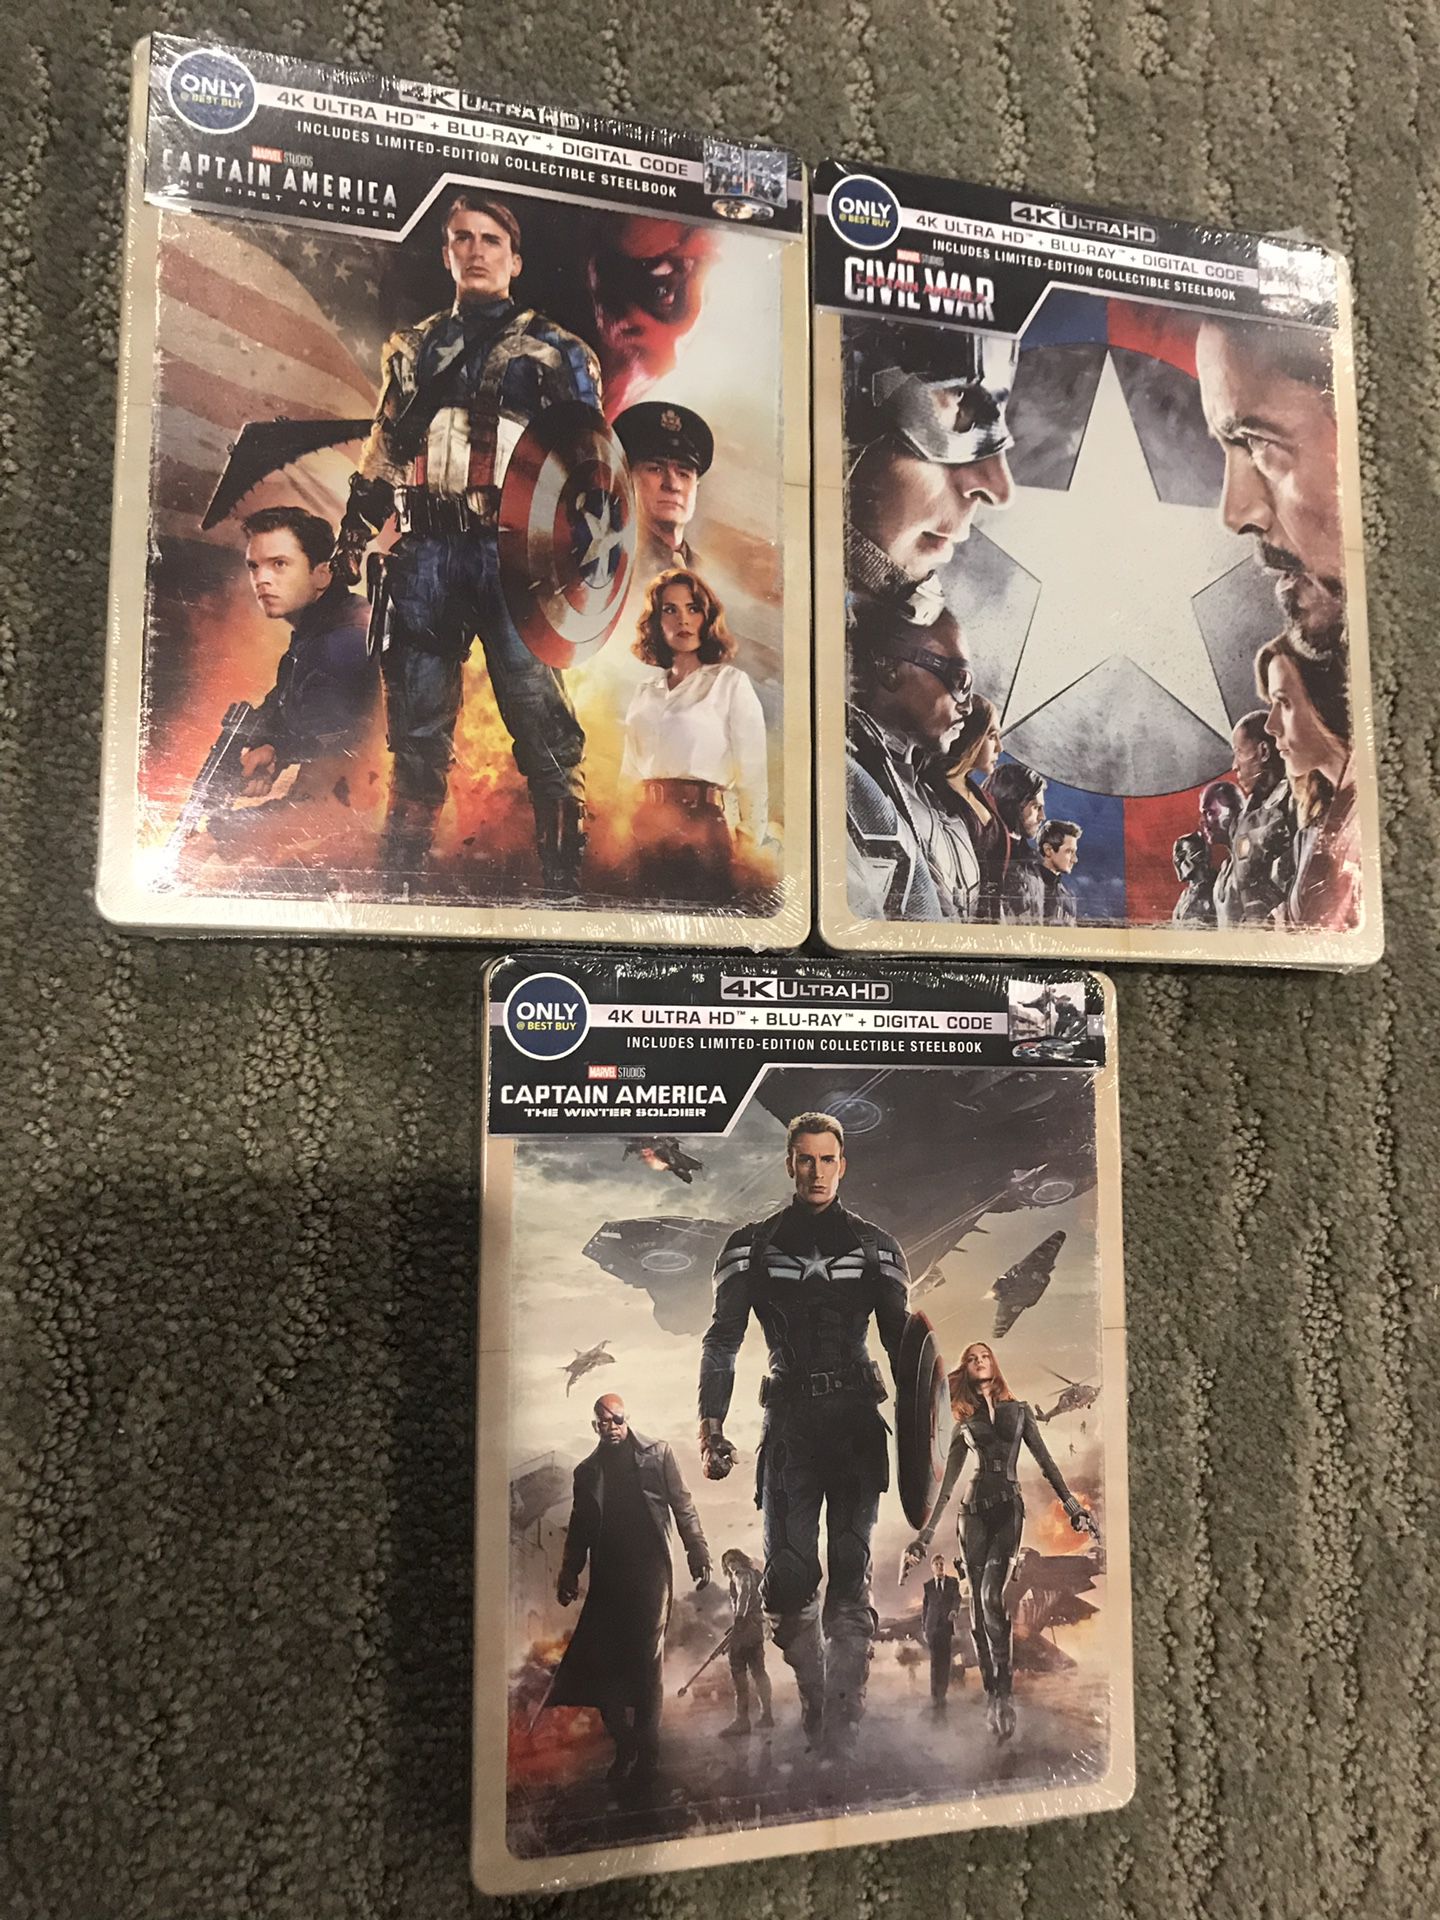 All 3 x Captain America 4K Blu-ray Steelbook s collection set